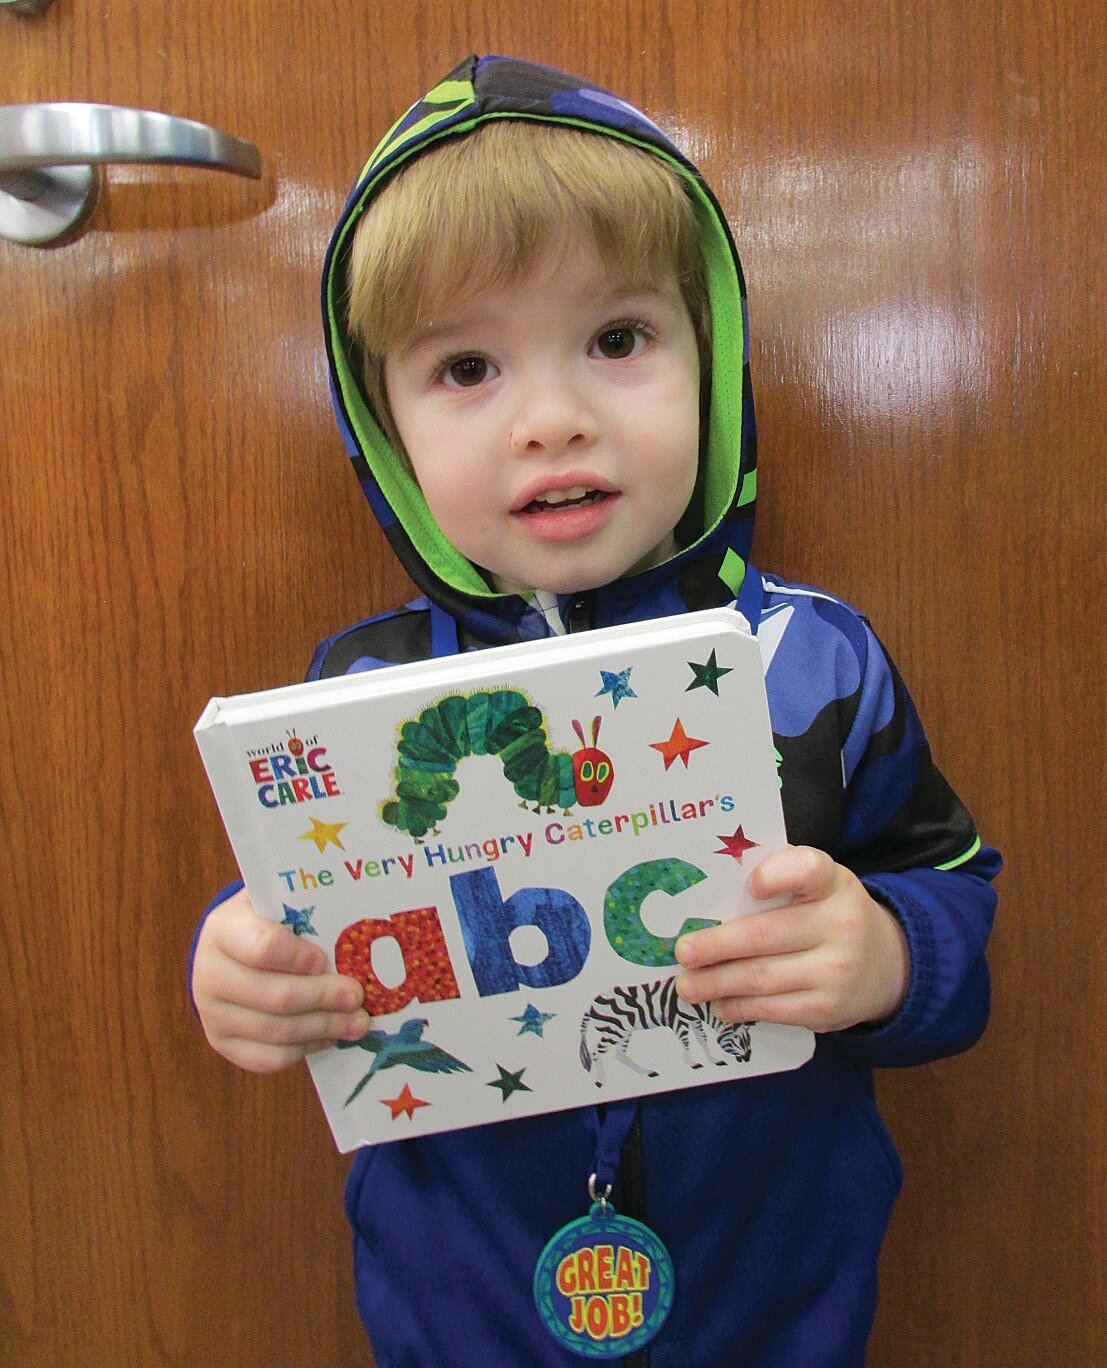 Isaac Phipps, 3, has completed 1,000 Books Before Kindergarten program at the Crawfordsville District Public Library. He is the son of Adam and Julia Phipps. Issac's favorite book is "Pete the Cat" by James Dean. Mom said, "We love our library! It's so great to get out of the house and read together. Thank you for everything you do!"